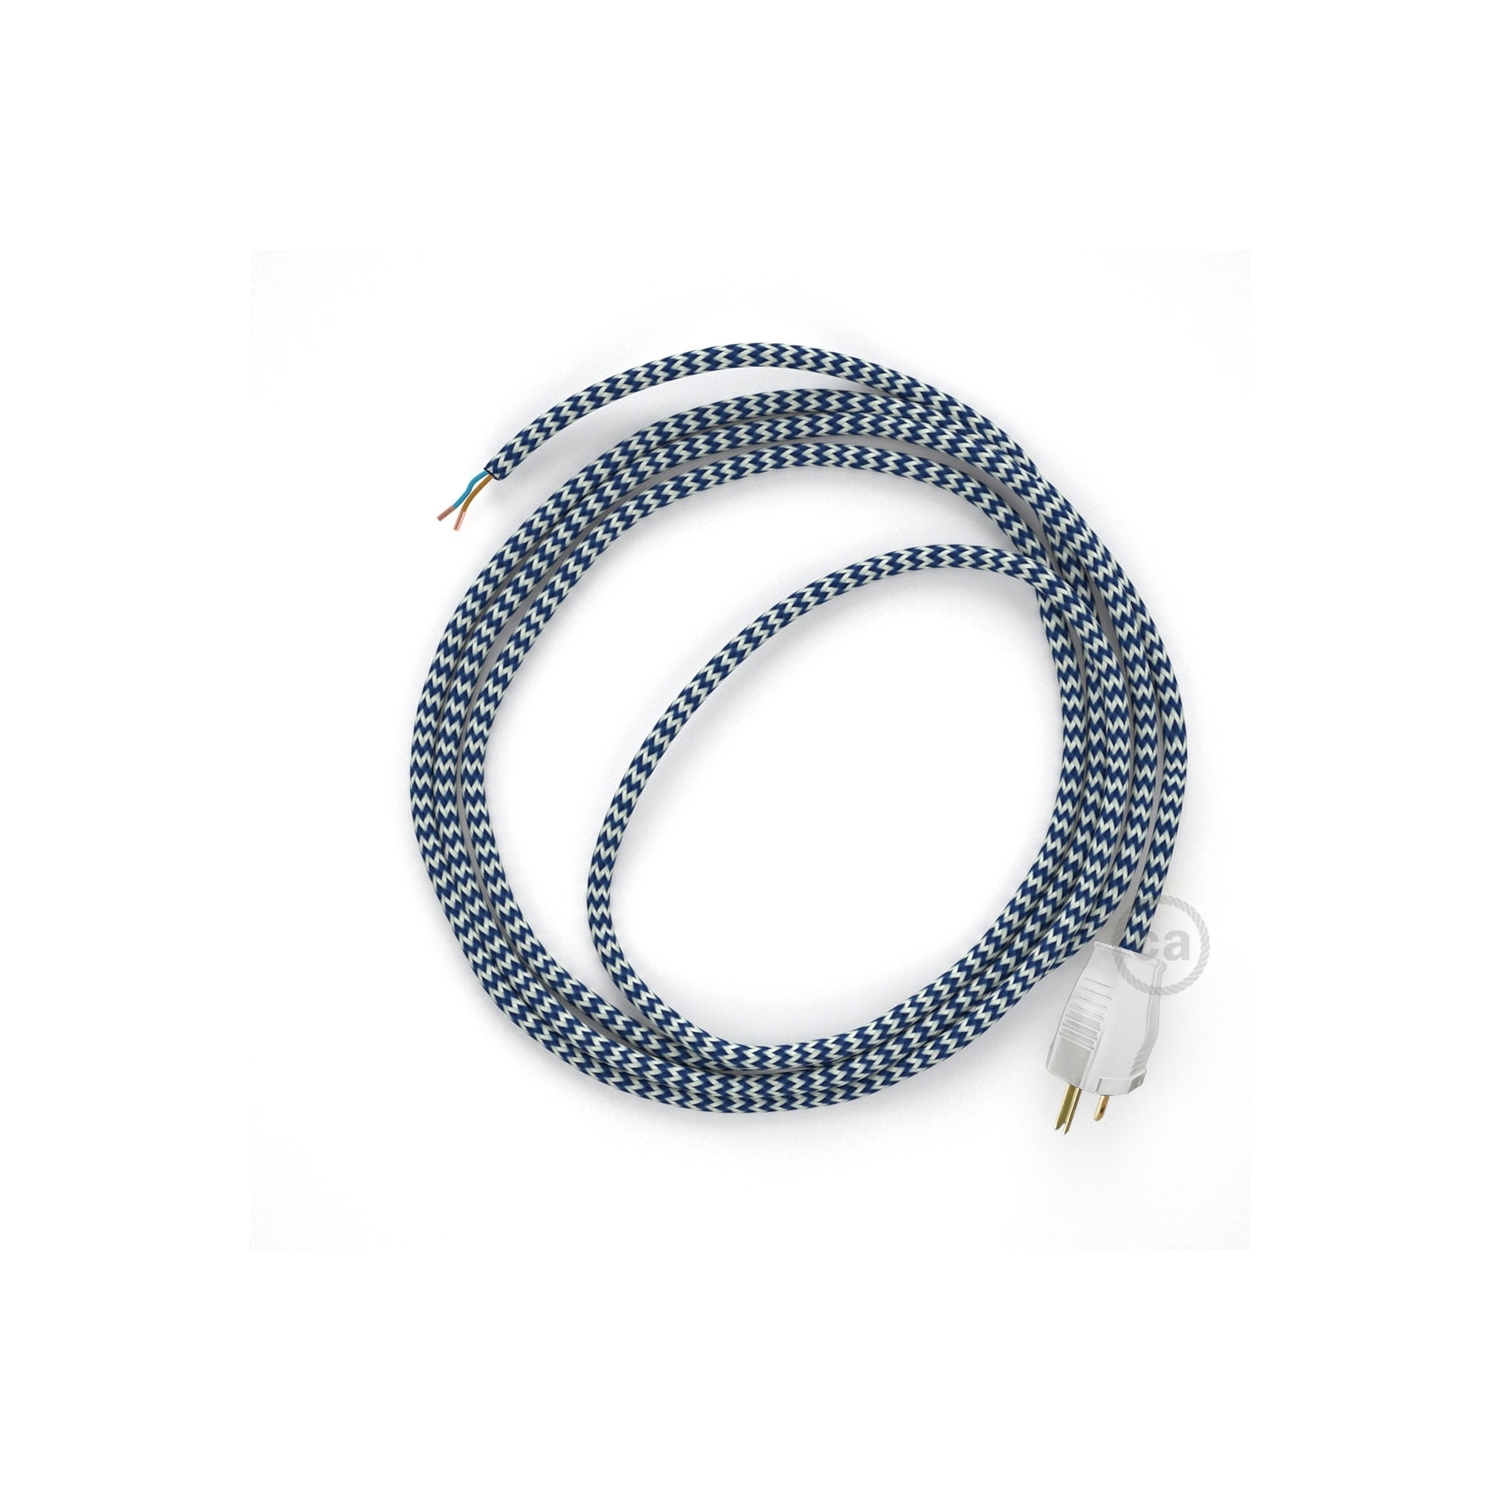 Cord-set - RZ12 Blue & White Chevron Covered Round Cable